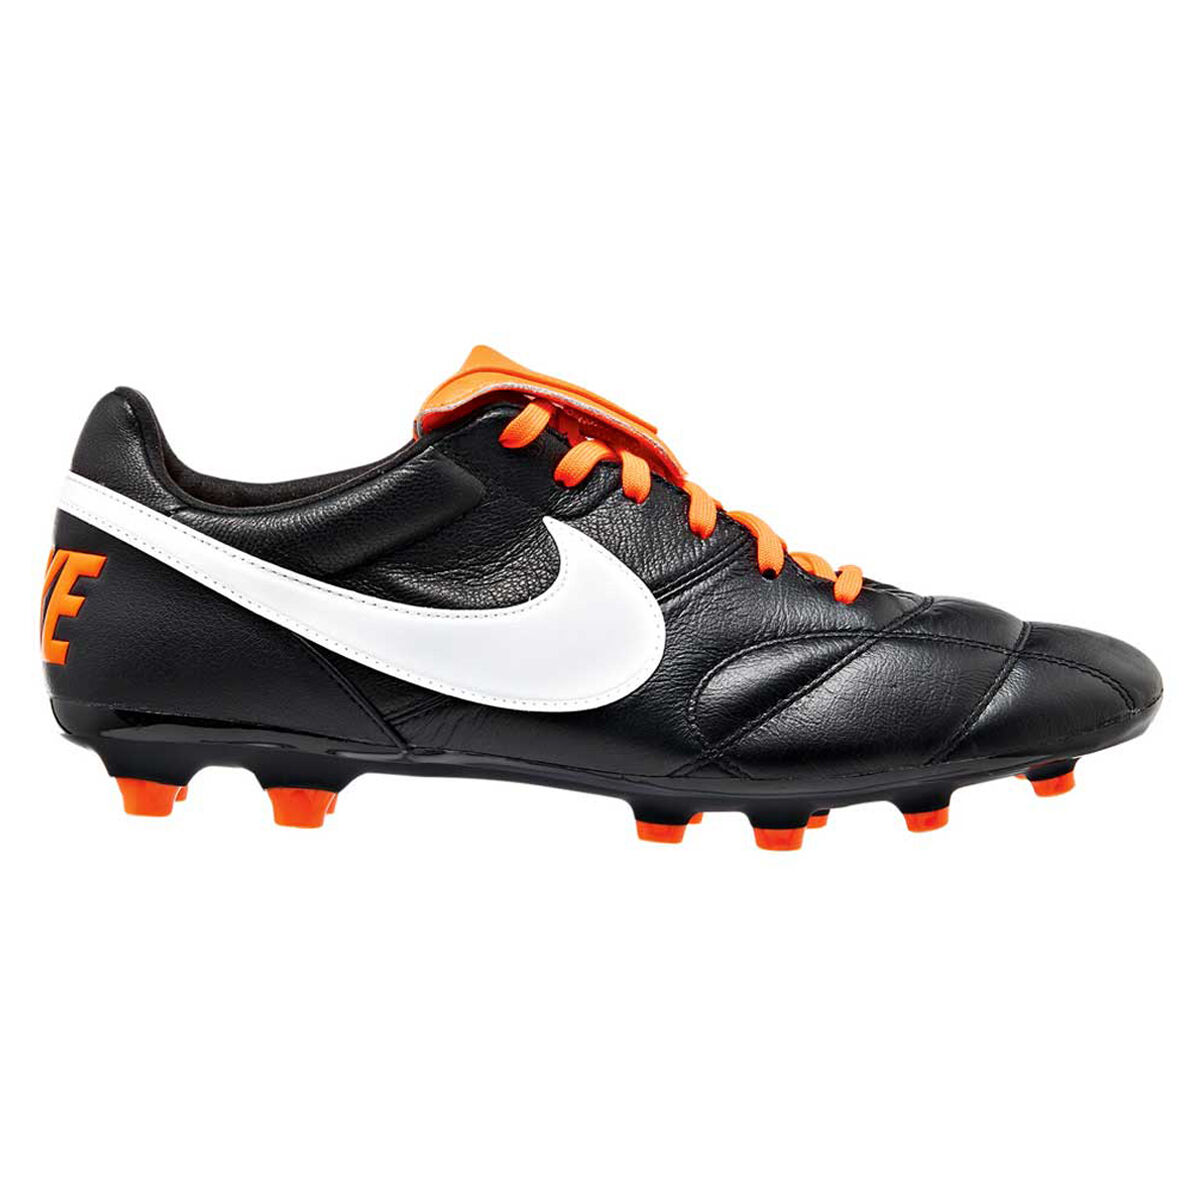 red and black nike football boots